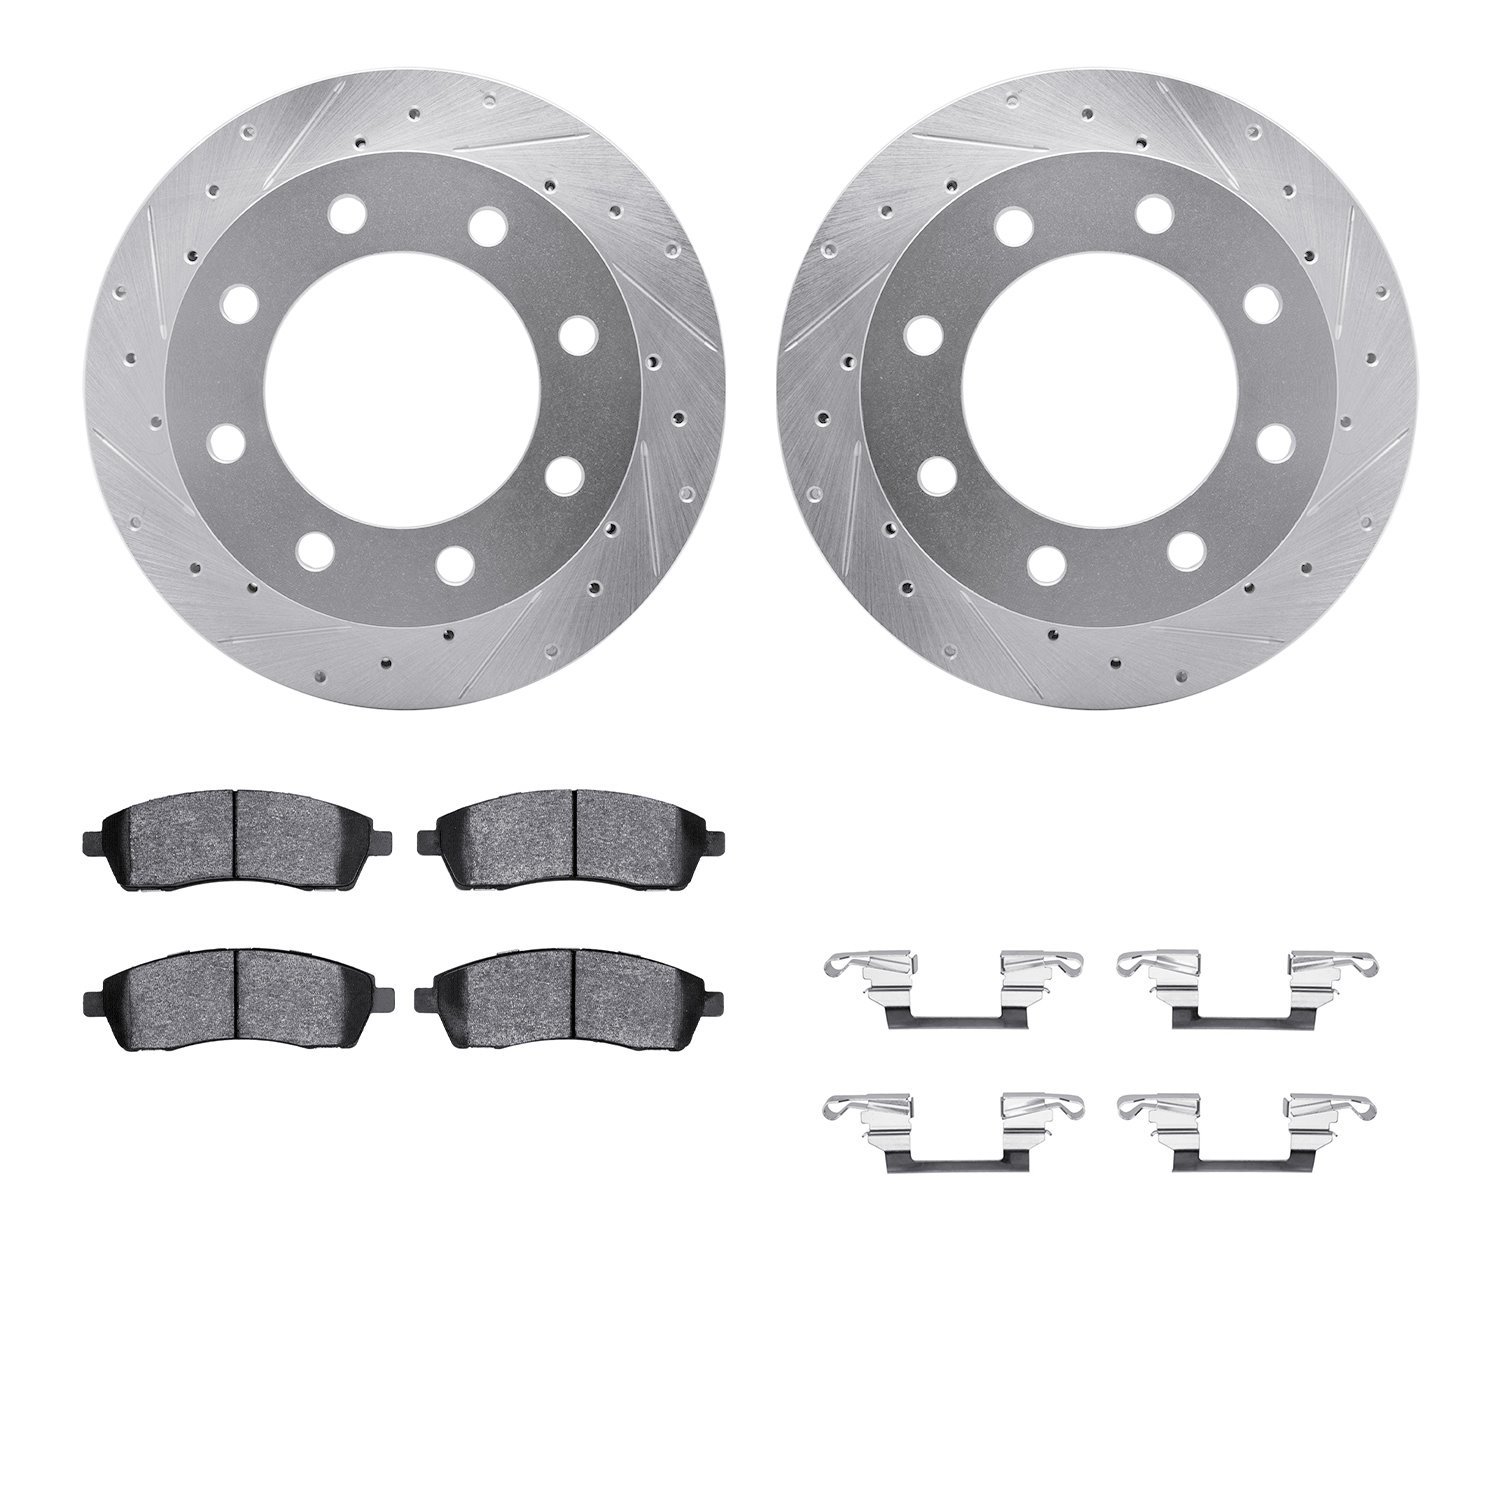 7412-54048 Drilled/Slotted Brake Rotors with Ultimate-Duty Brake Pads Kit & Hardware [Silver], 1999-2005 Ford/Lincoln/Mercury/Ma